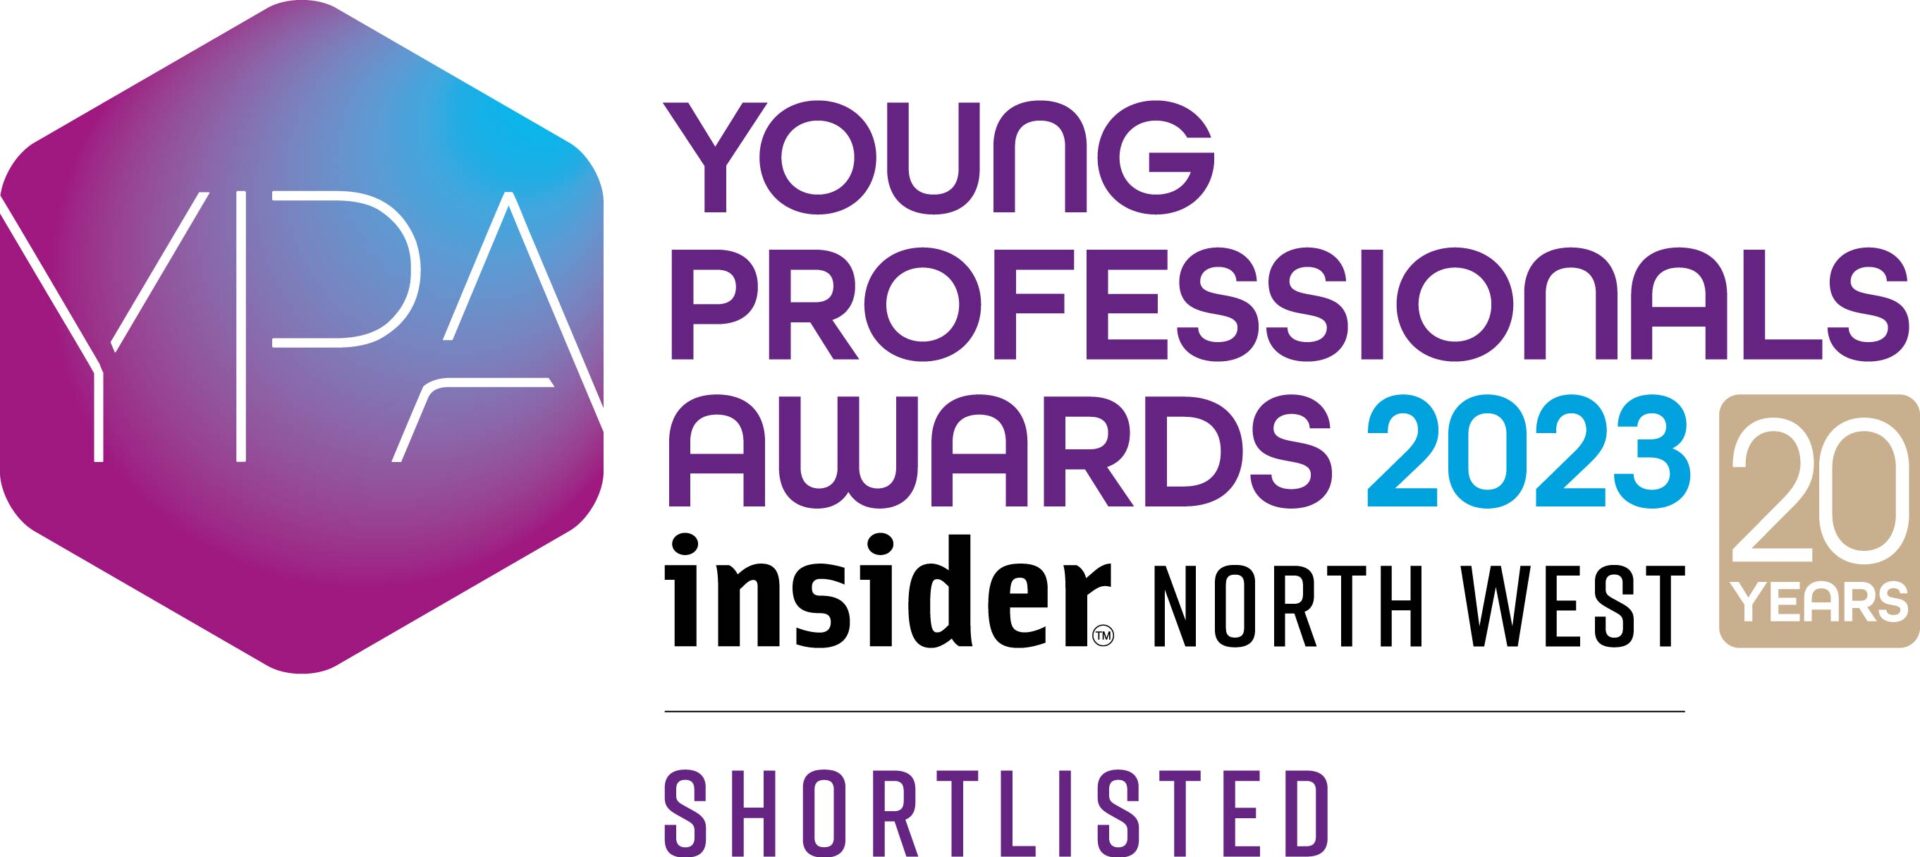 Young-Professionals-Awards-North-West-shortlisted-2023_-1920x857